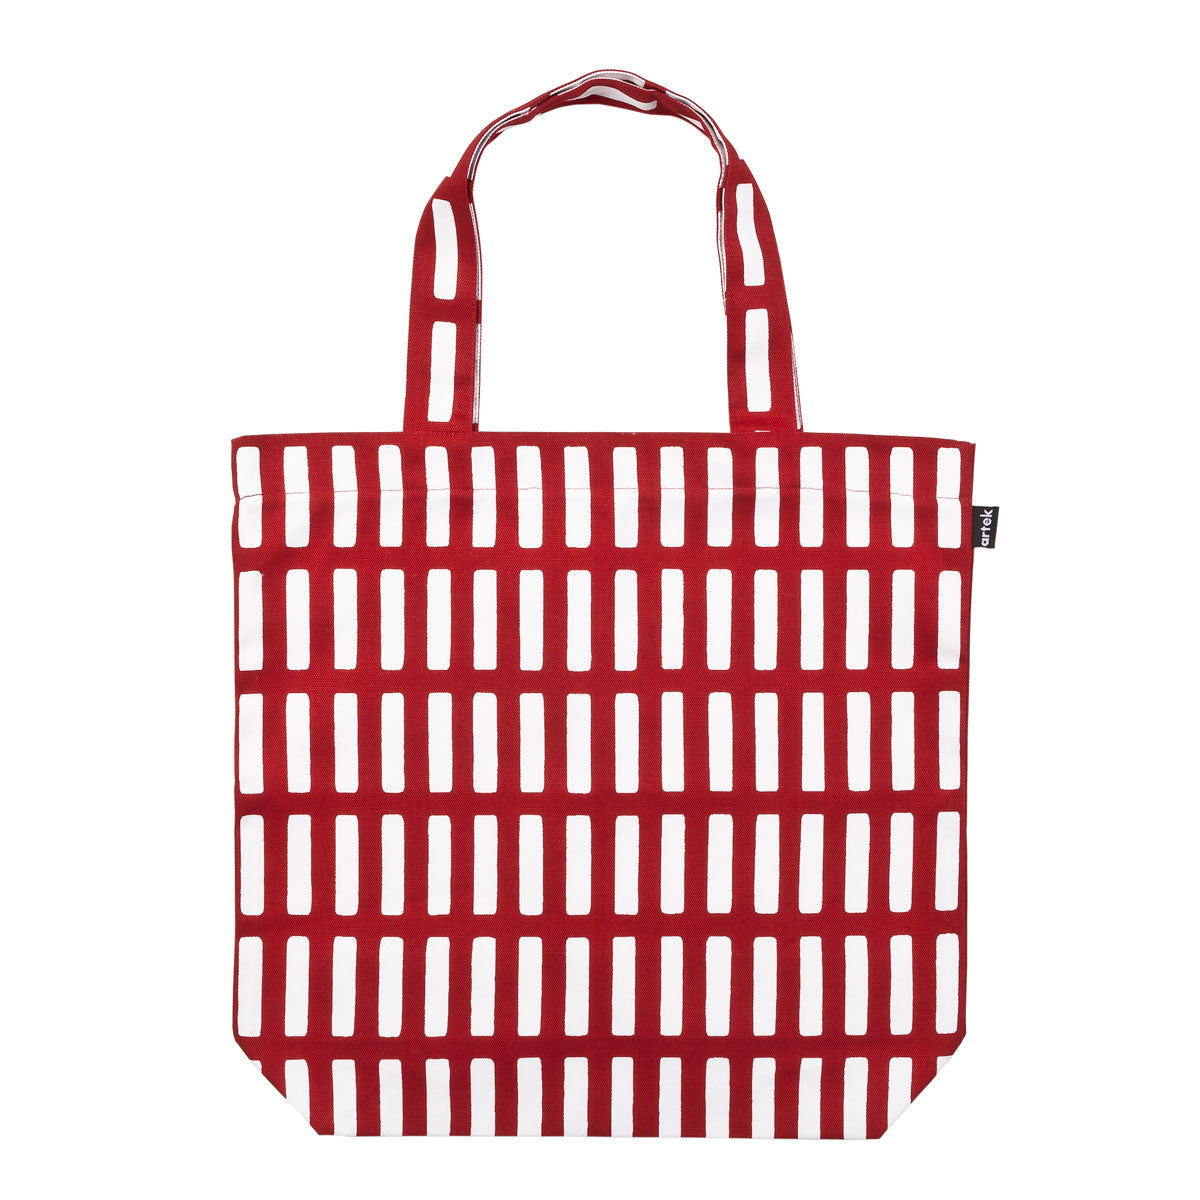 Artek Canvas Bag tote Aalto Siena red and white